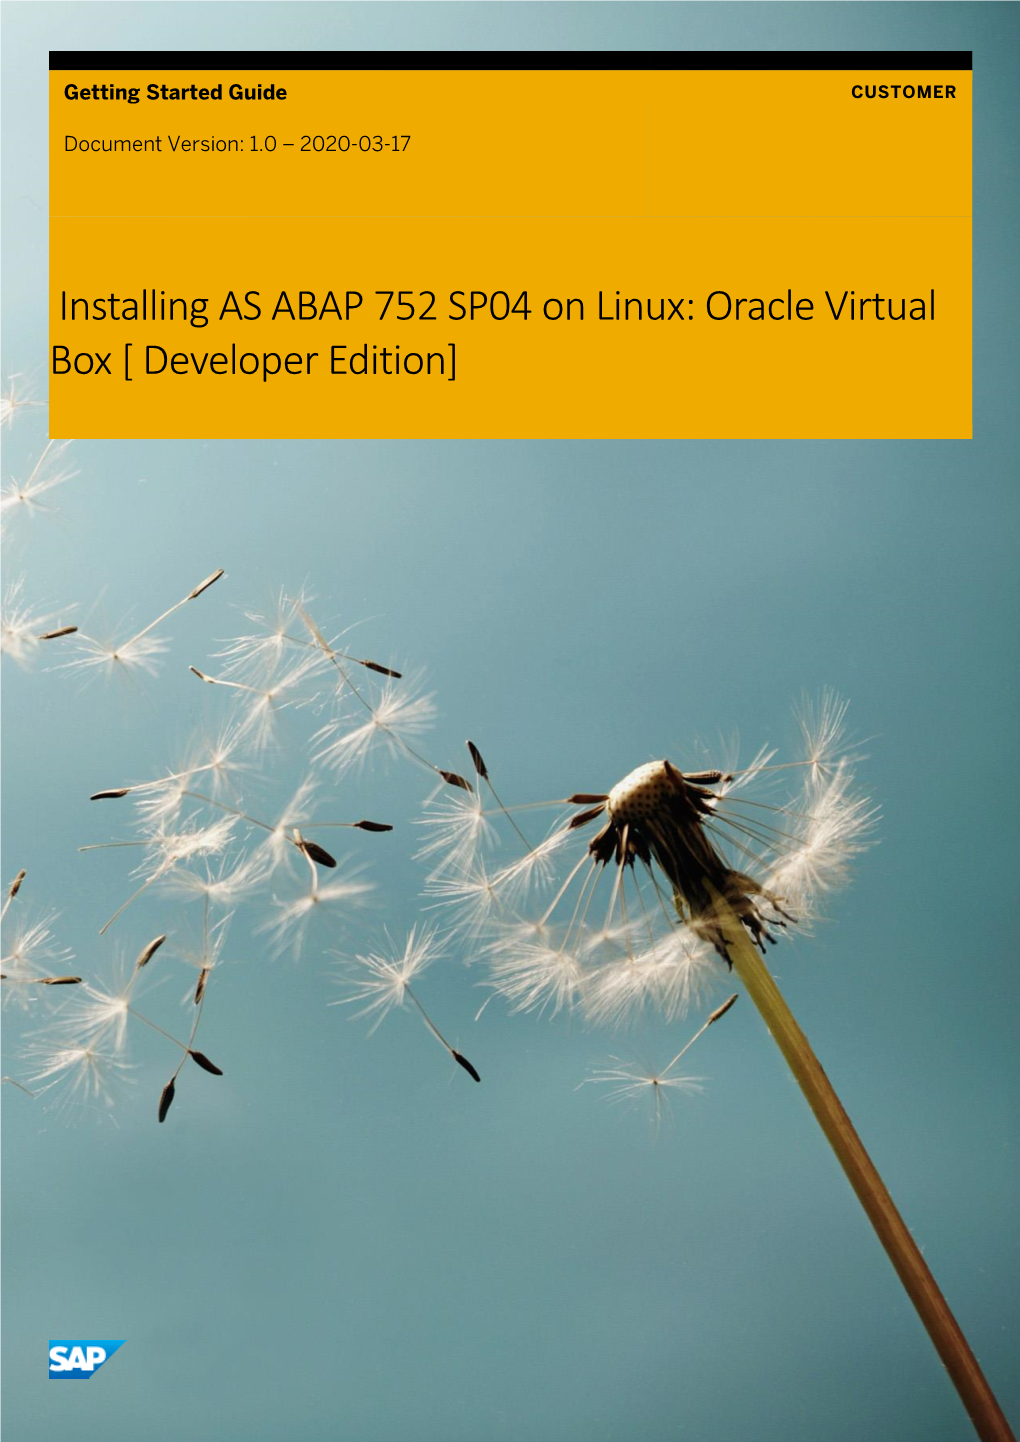 Installing AS ABAP 752 SP04 on Linux: Oracle Virtual Box [ Developer Edition]